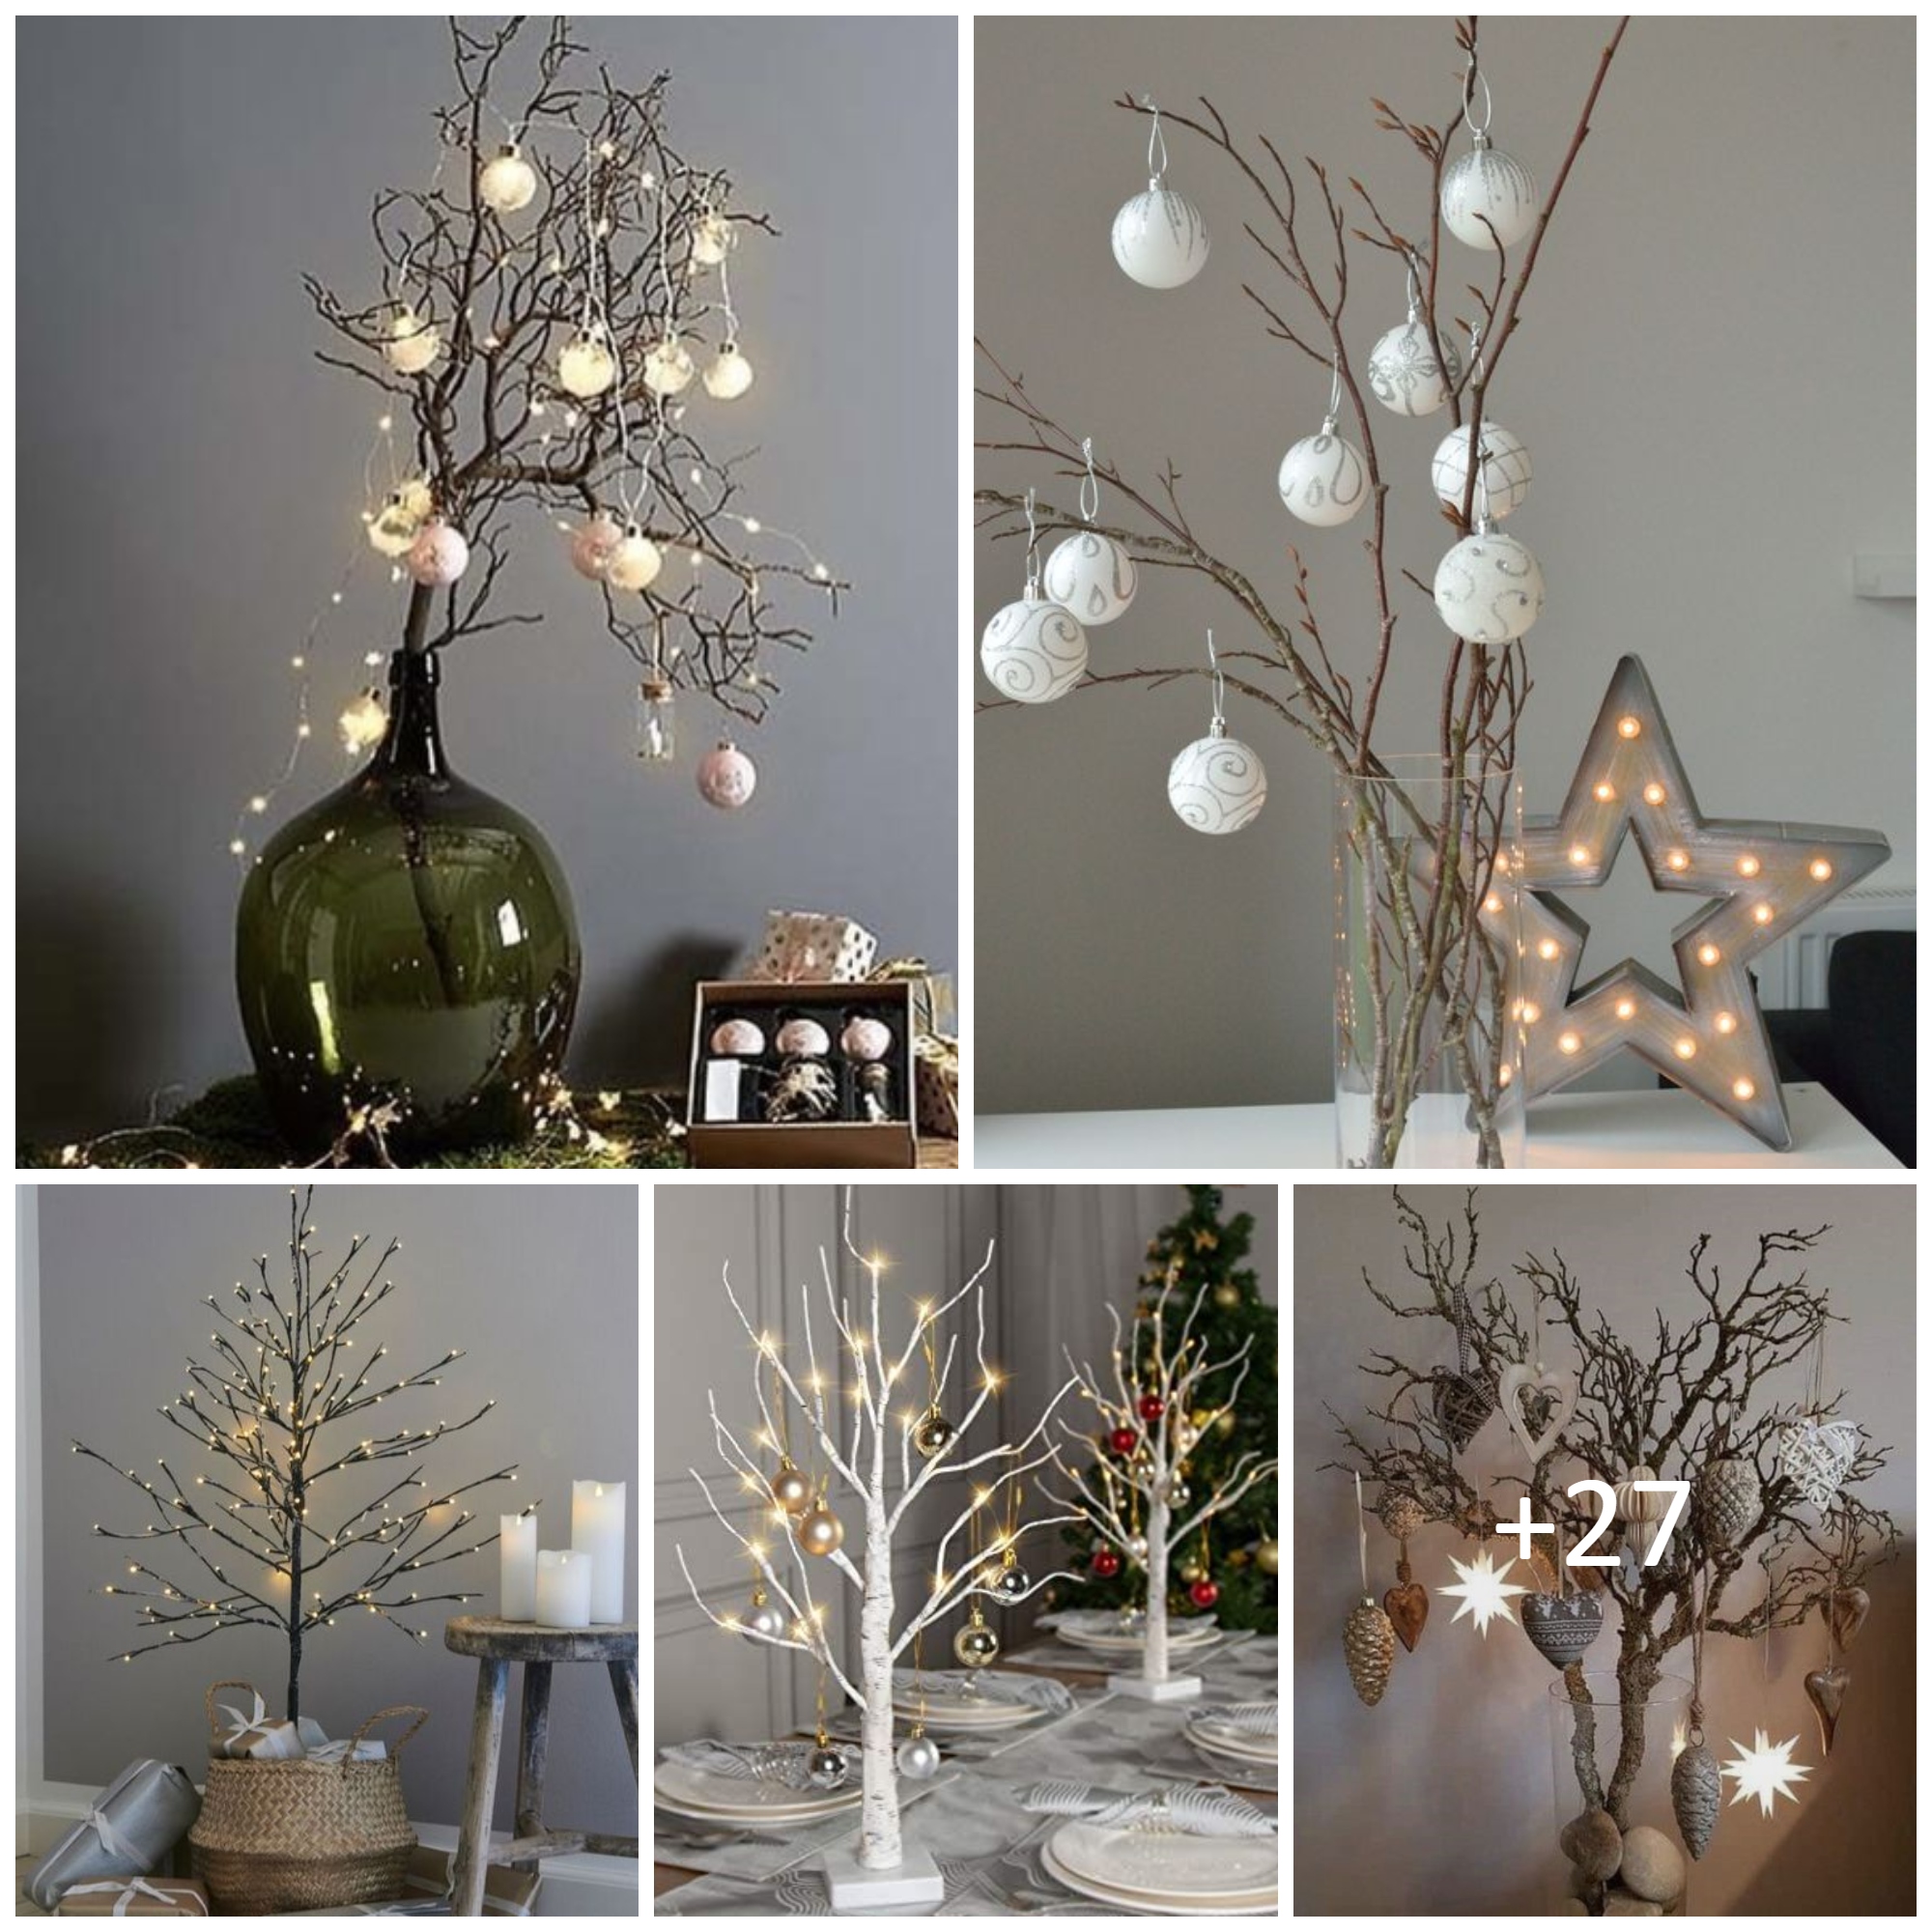 How to use small twigs as a background for Christmas decorations